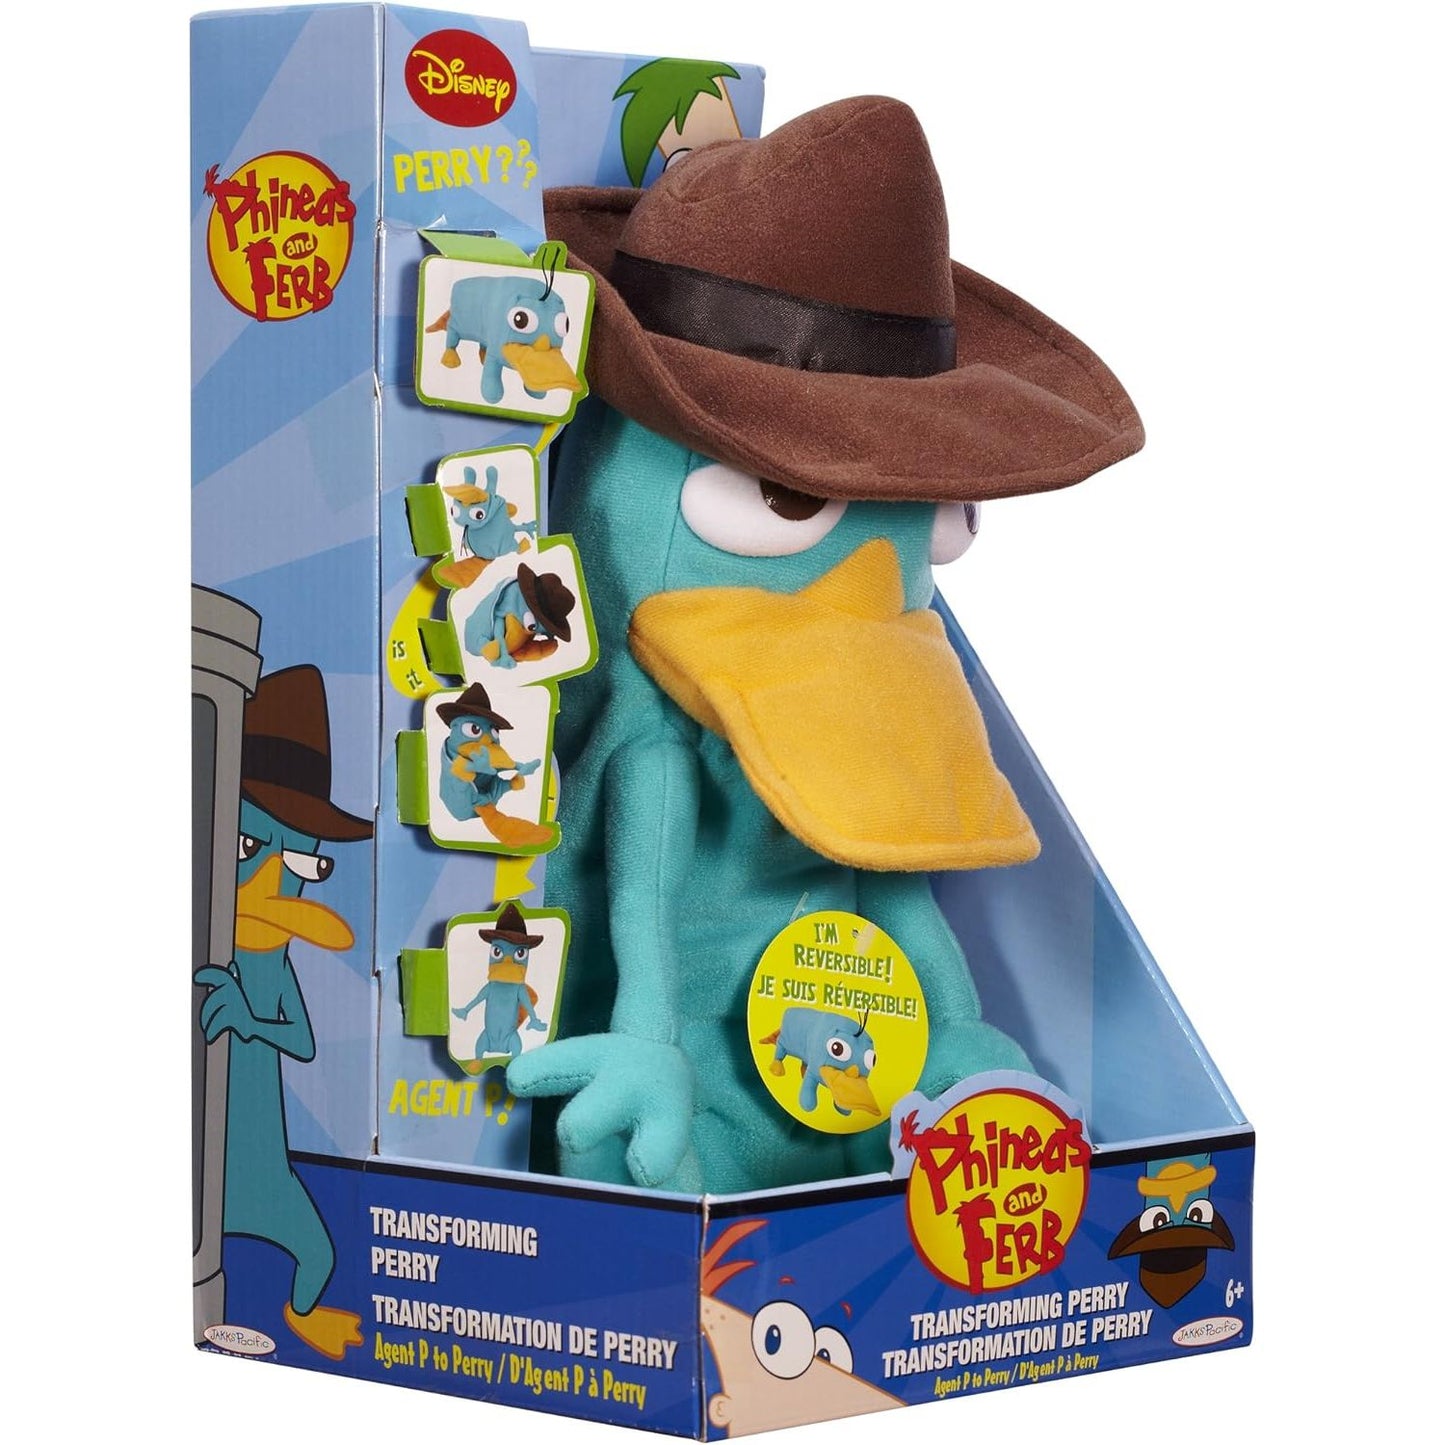 Disney Phineas and Ferb Transforming Perry